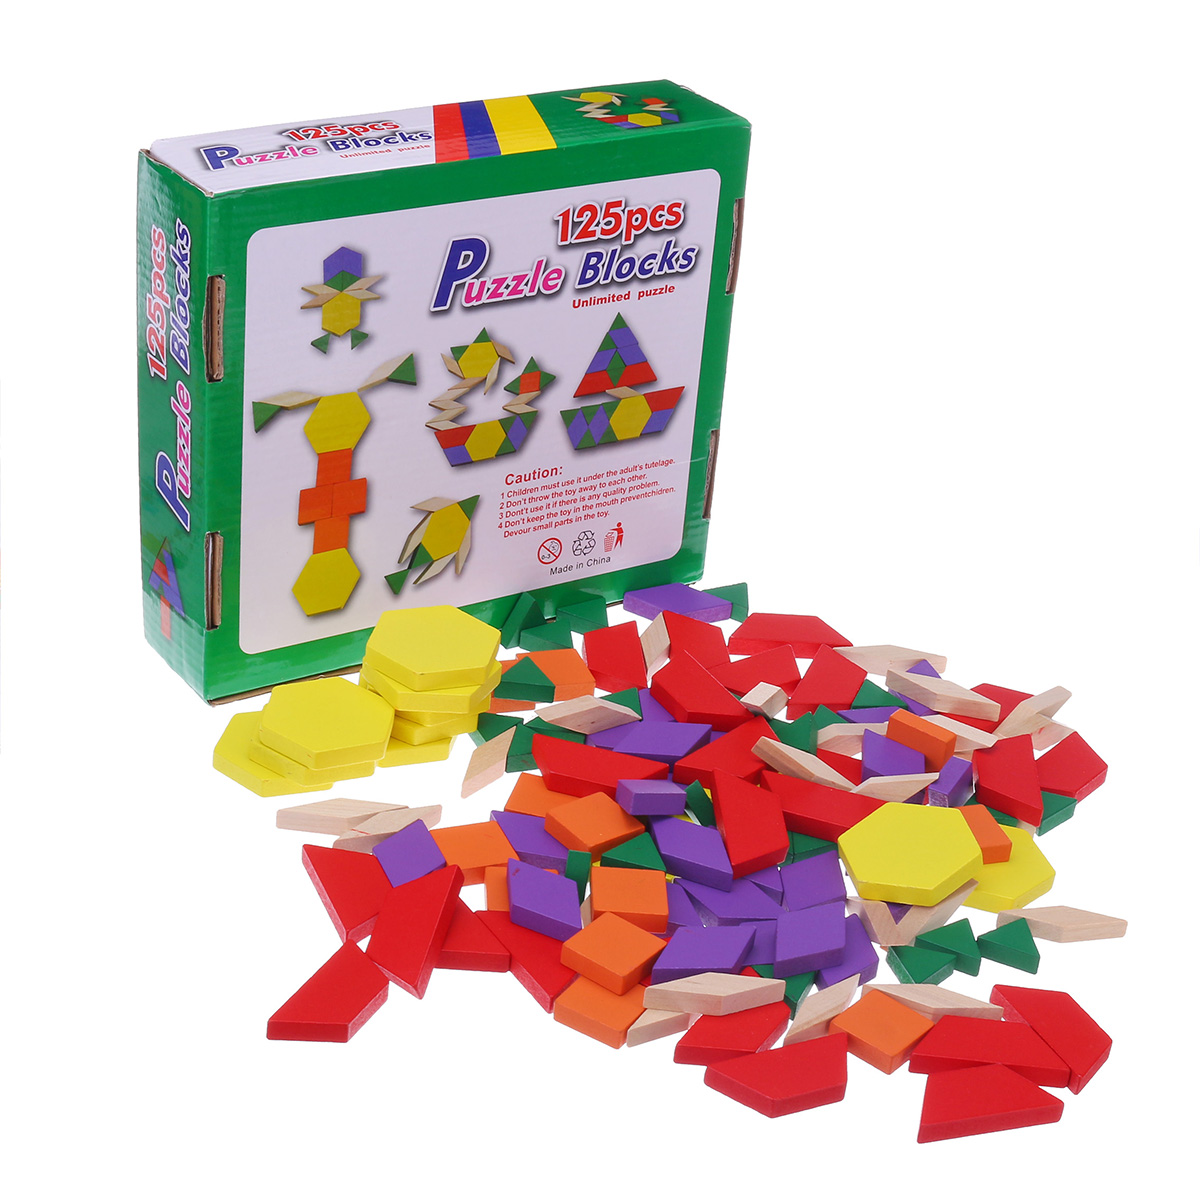 125-Pieces-Wooden-Childrens-Intellectual-Geometric-Shapes-Building-Blocks-Jigsaw-Puzzles-Early-Educa-1701898-1